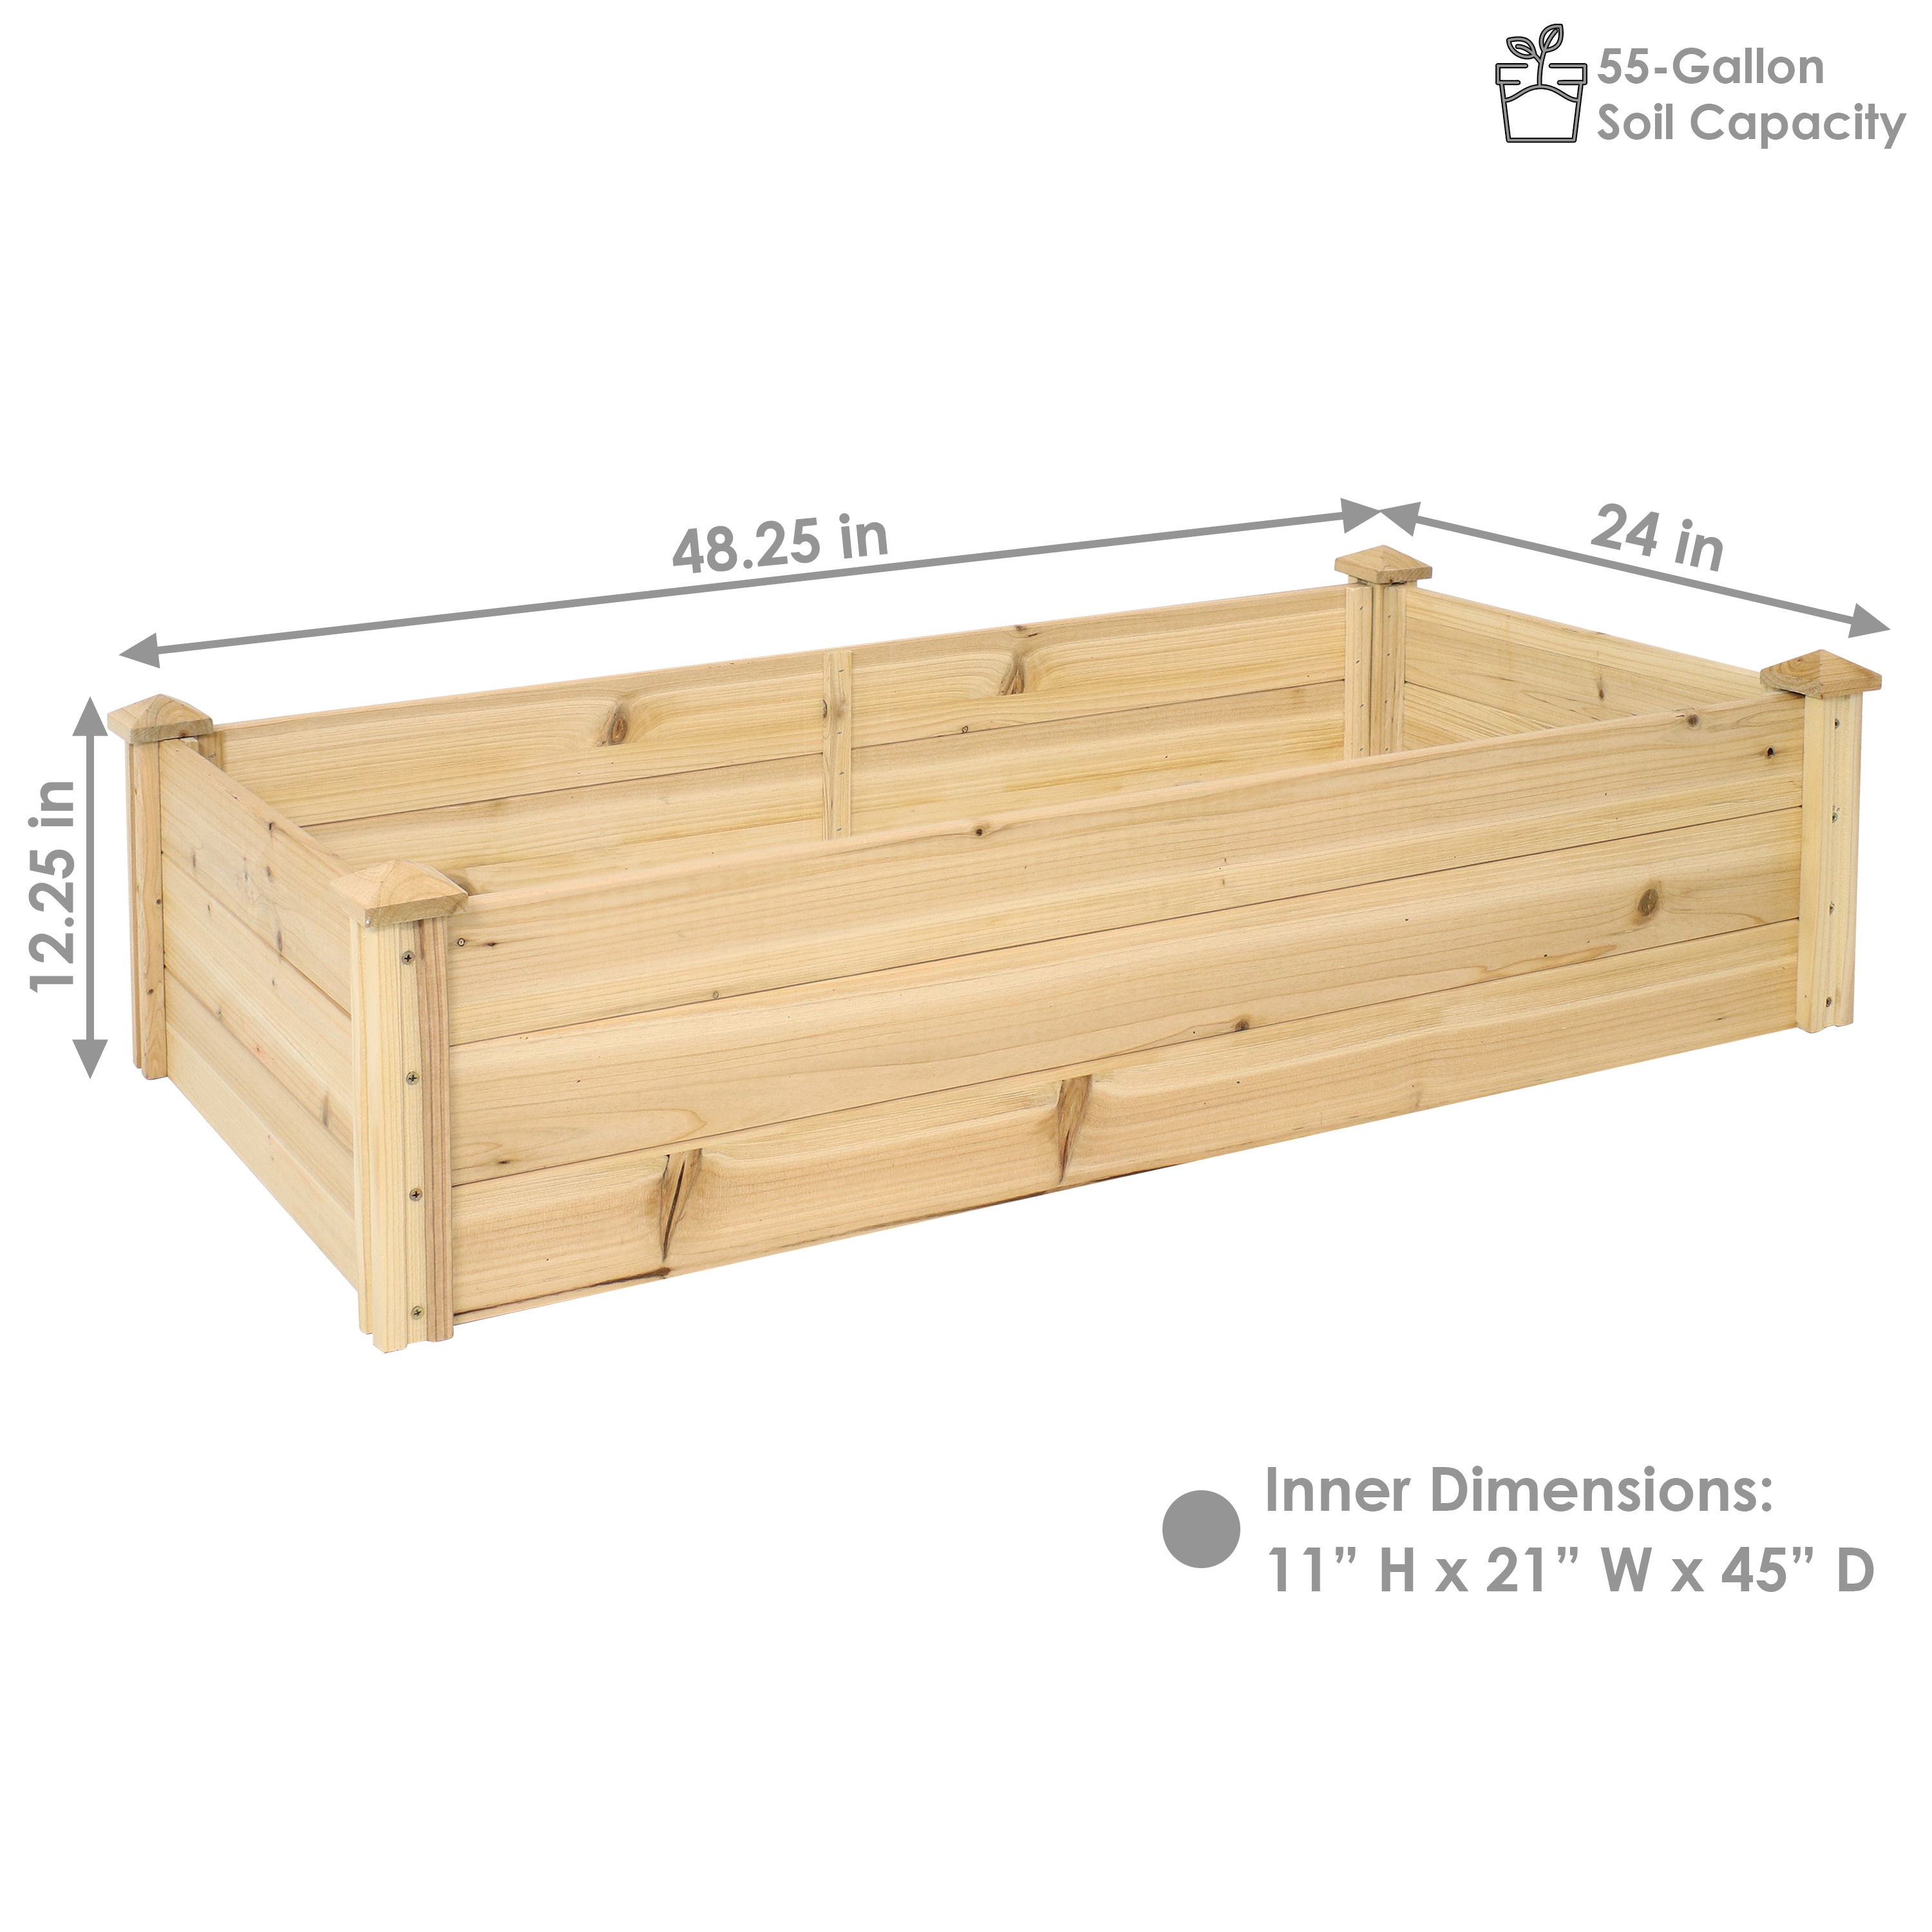 COZUHAUSE Solid Wood Raised Garden Bed for Vegetable/Flower/Fruit 47 L×19 W×22 H Box Nature Wood 22 